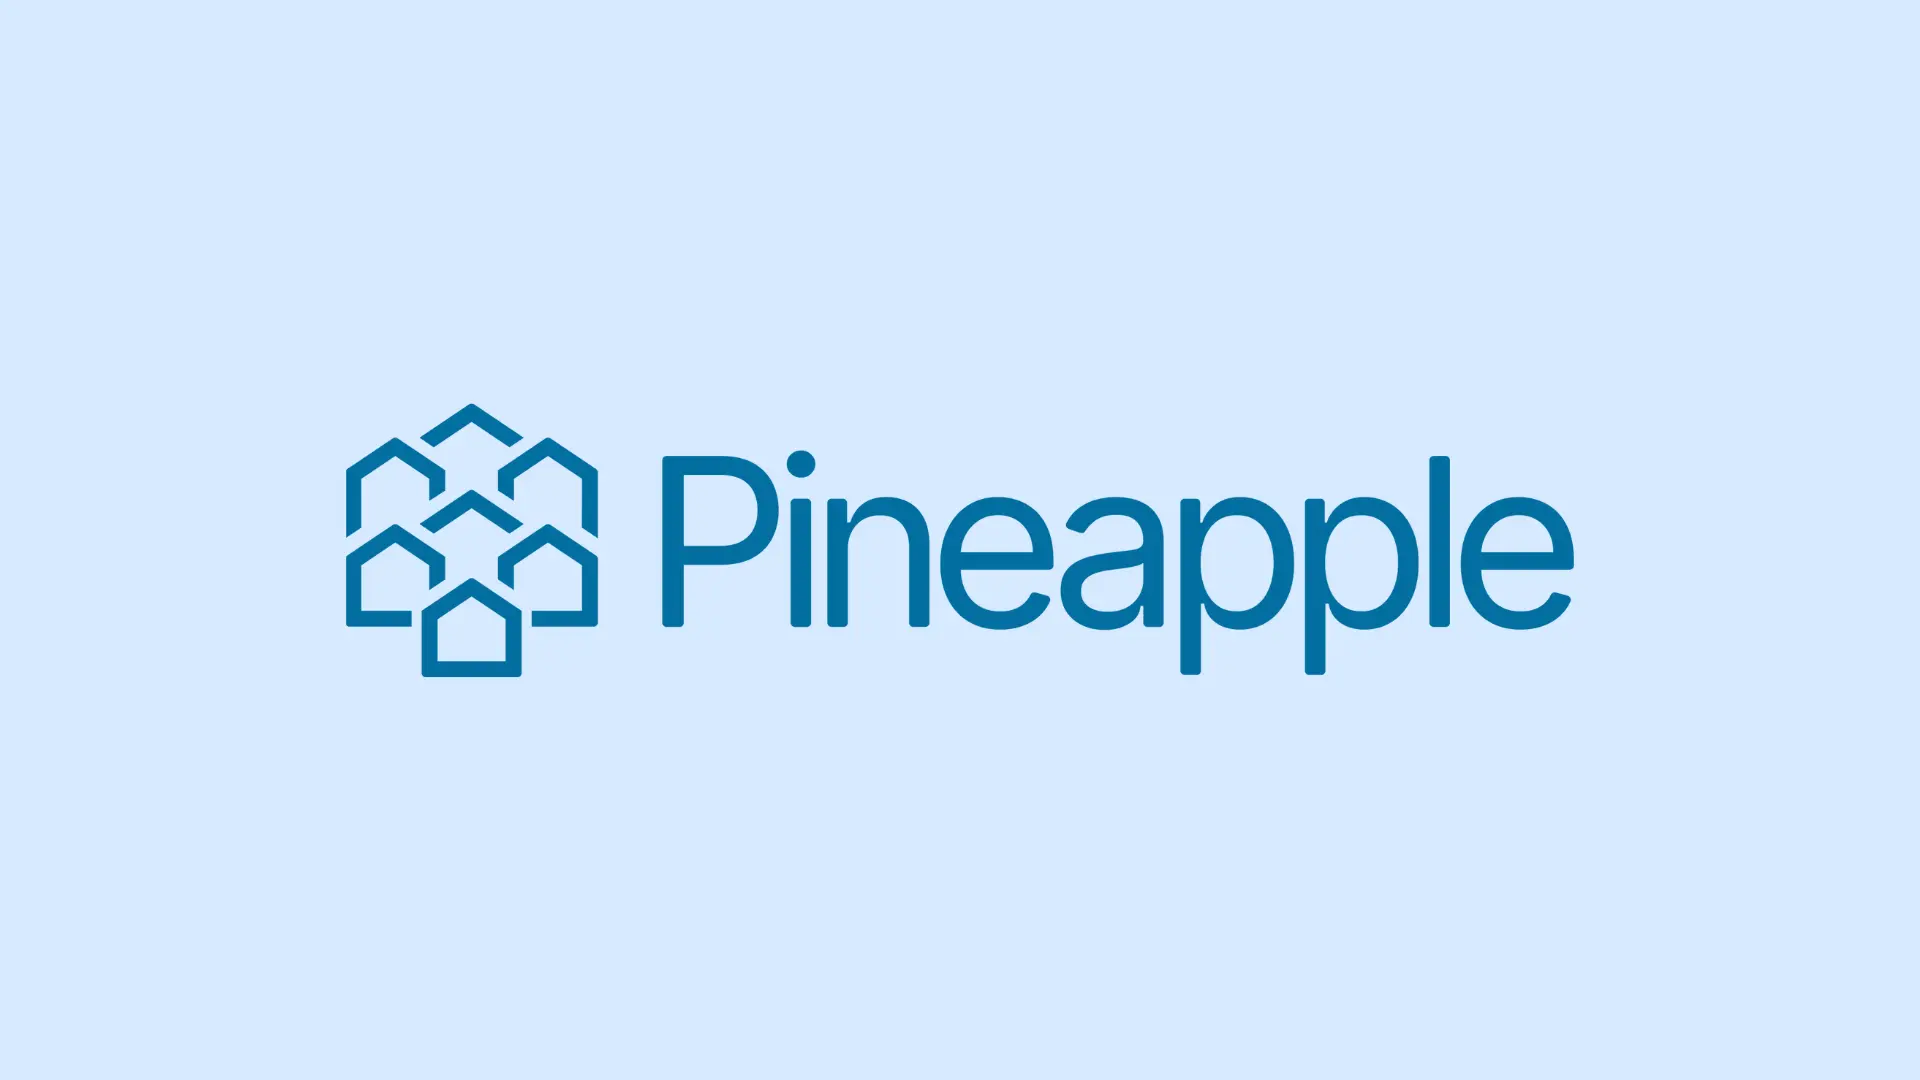 Welcome to Pineapple: Onboarding Updates